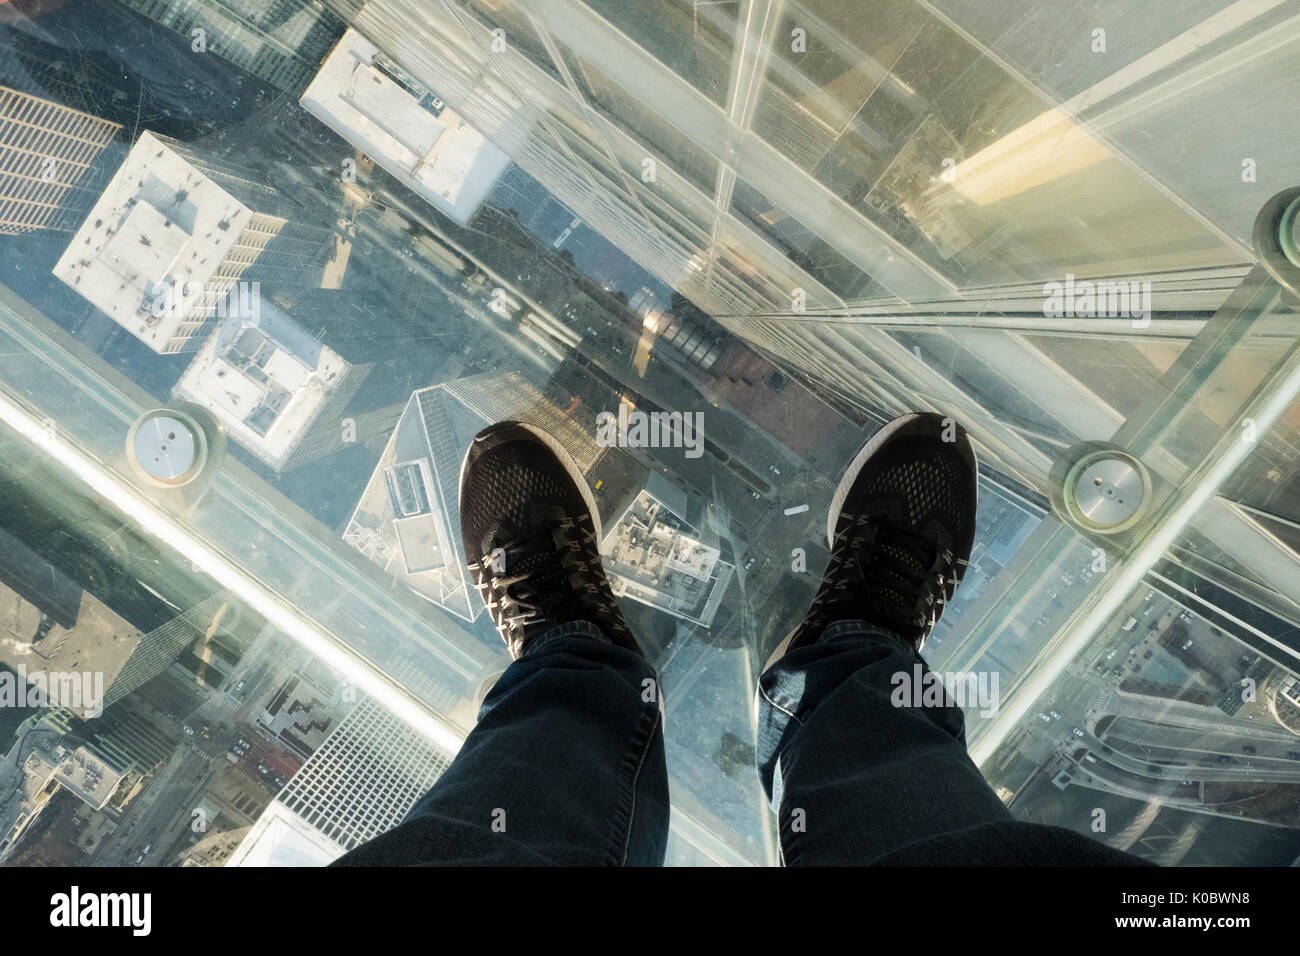 Skydeck, Willis Tower, Chicago Stock Photo